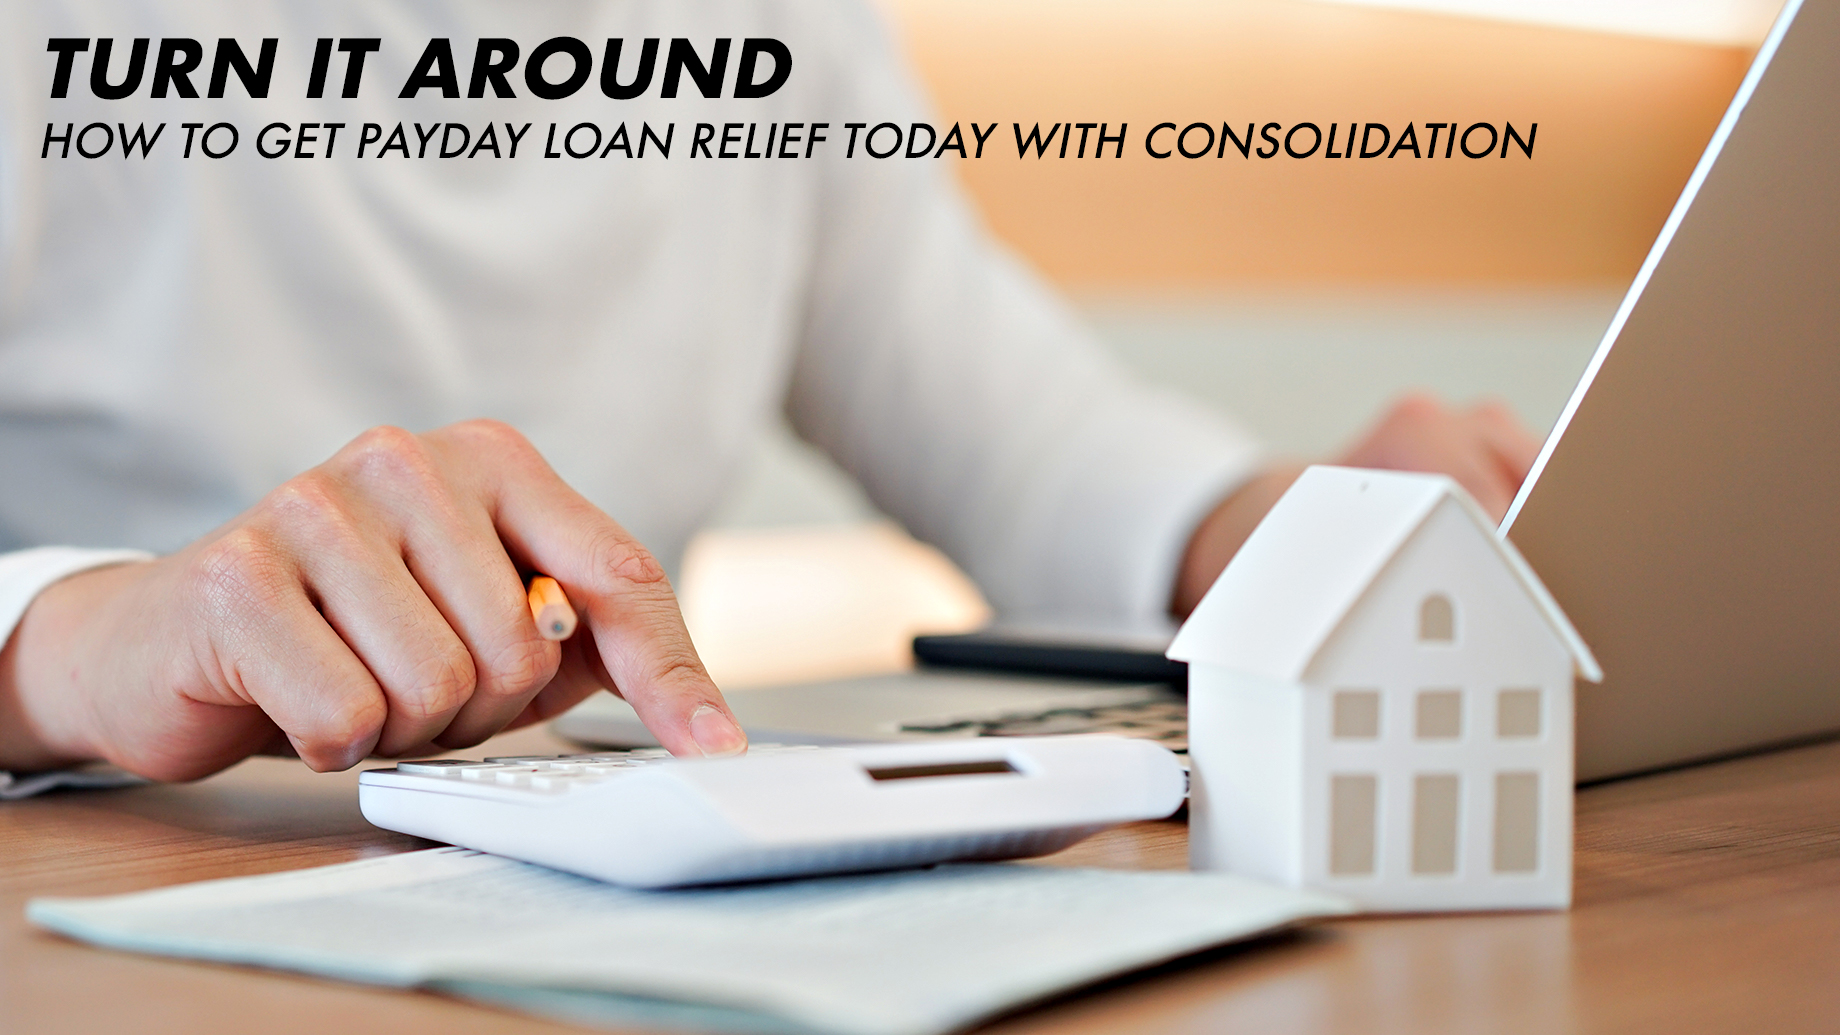 Turn It Around - How to Get Payday Loan Relief Today with Consolidation